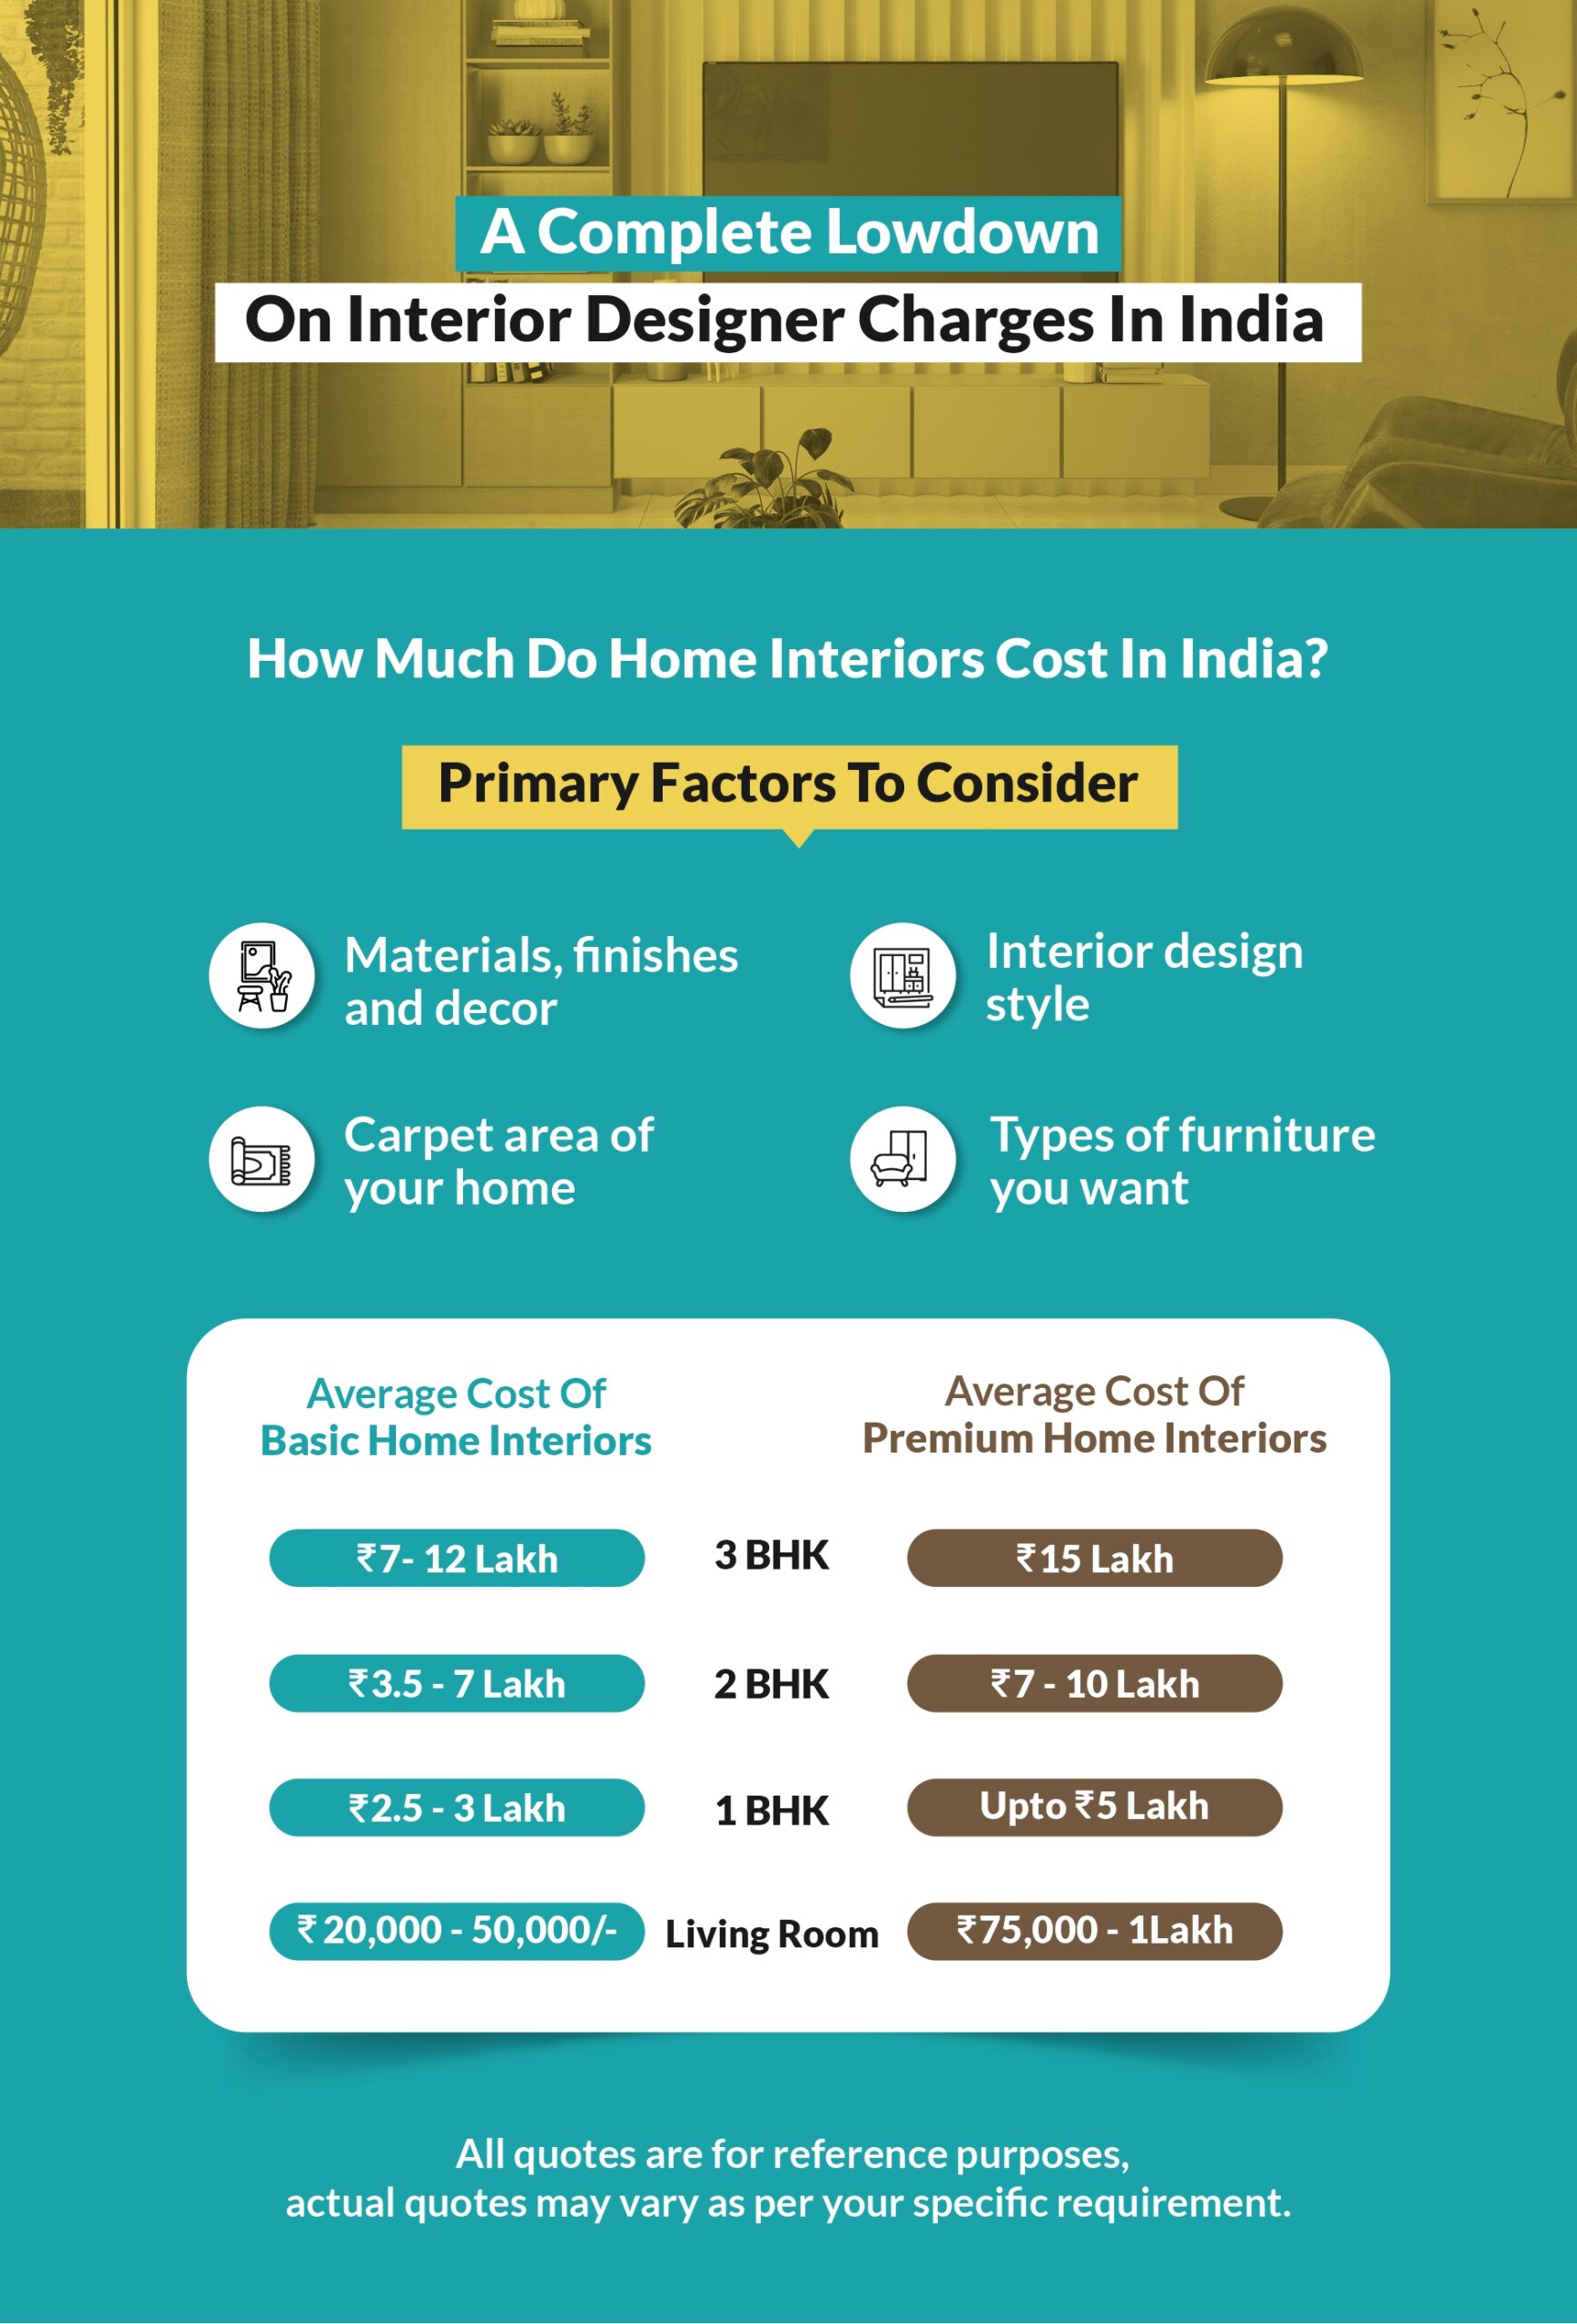 How much do home interiors cost in India